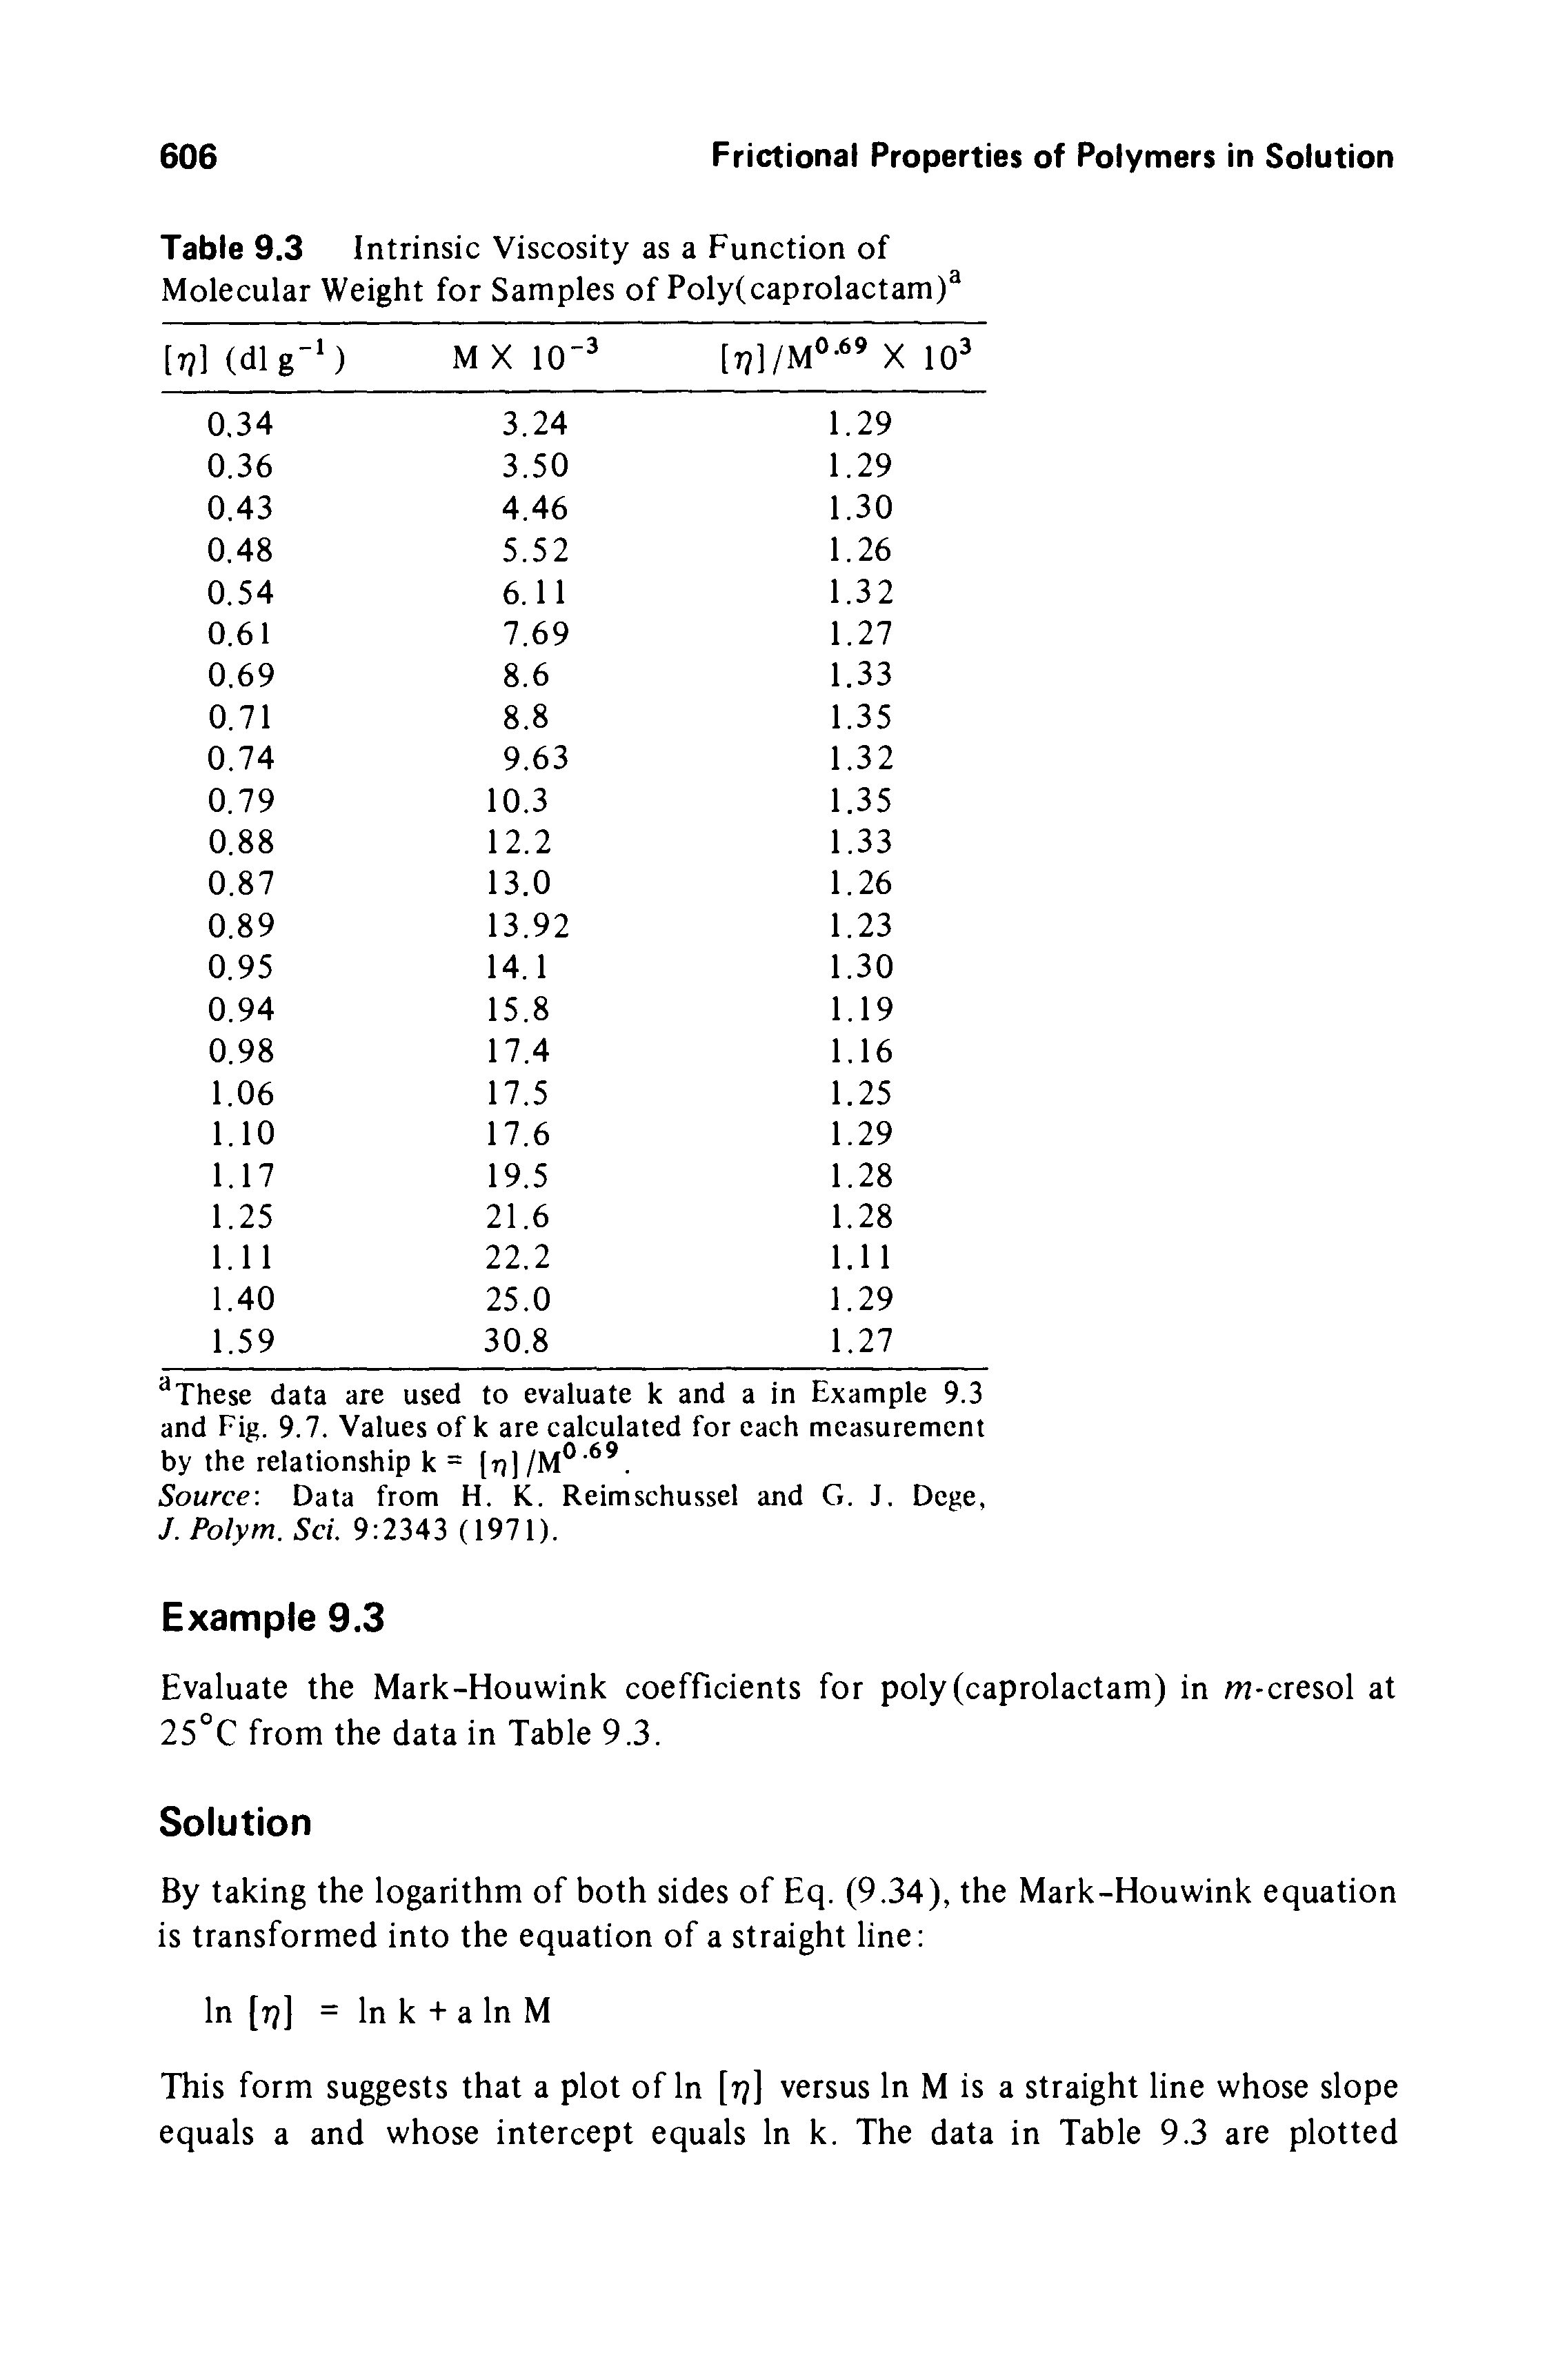 Table 9.3 Intrinsic Viscosity as a Function of Molecular Weight for Samples of Poly(caprolactam) ...